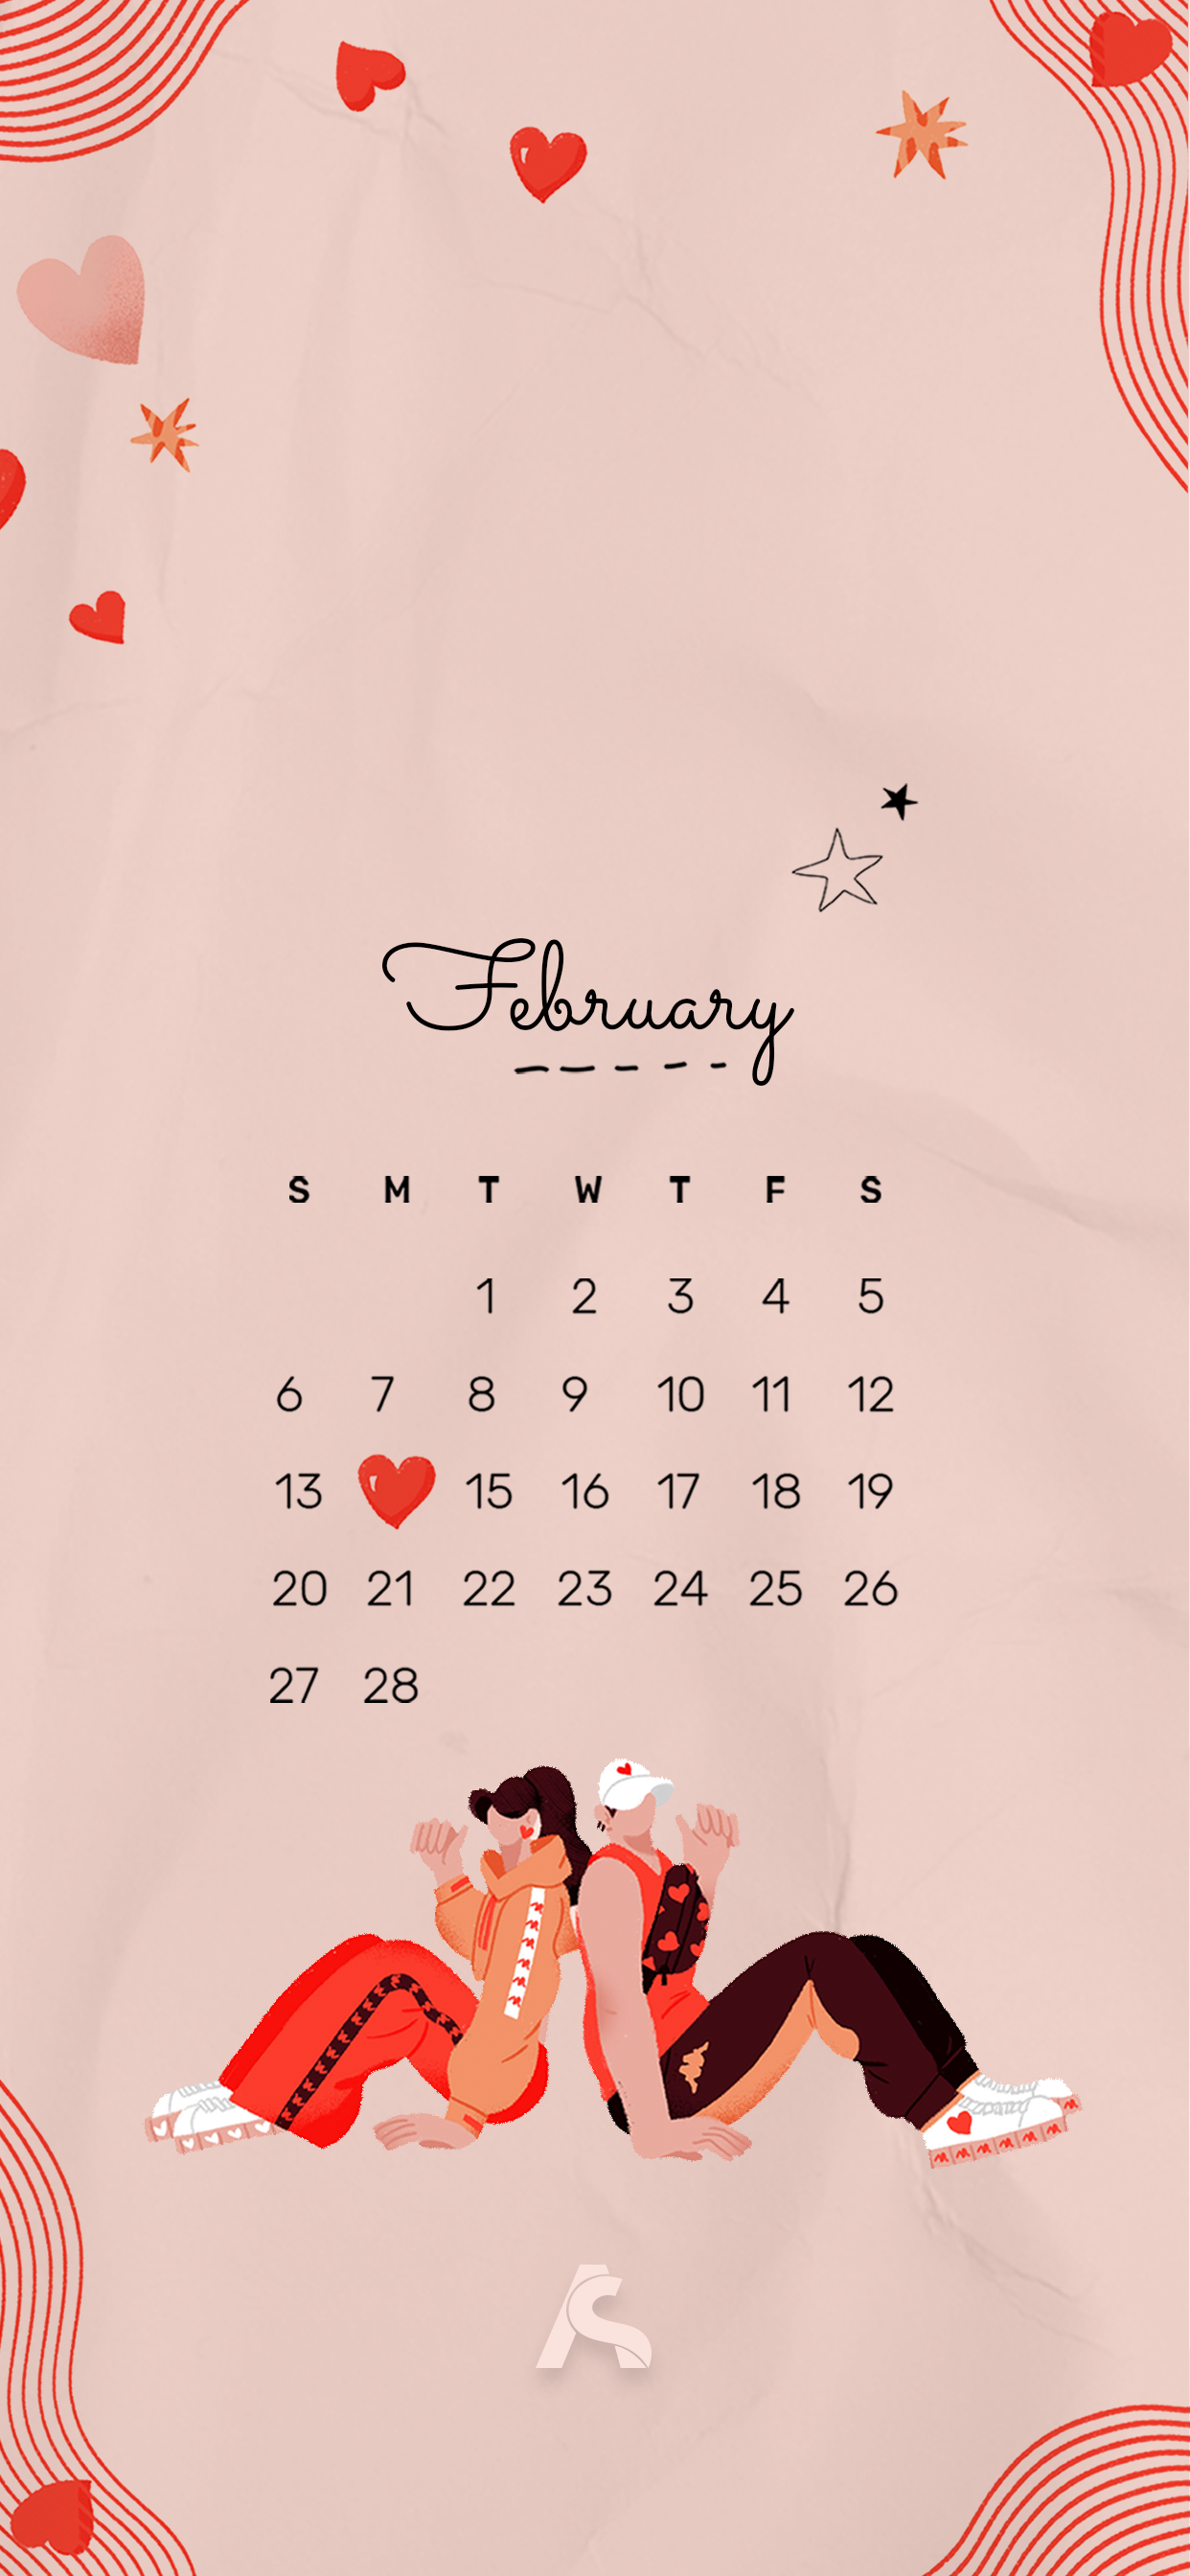 14 Cute February Wallpaper Ideas 2023  Candy Heart Pink Background  Idea  Wallpapers  iPhone WallpapersColor Schemes